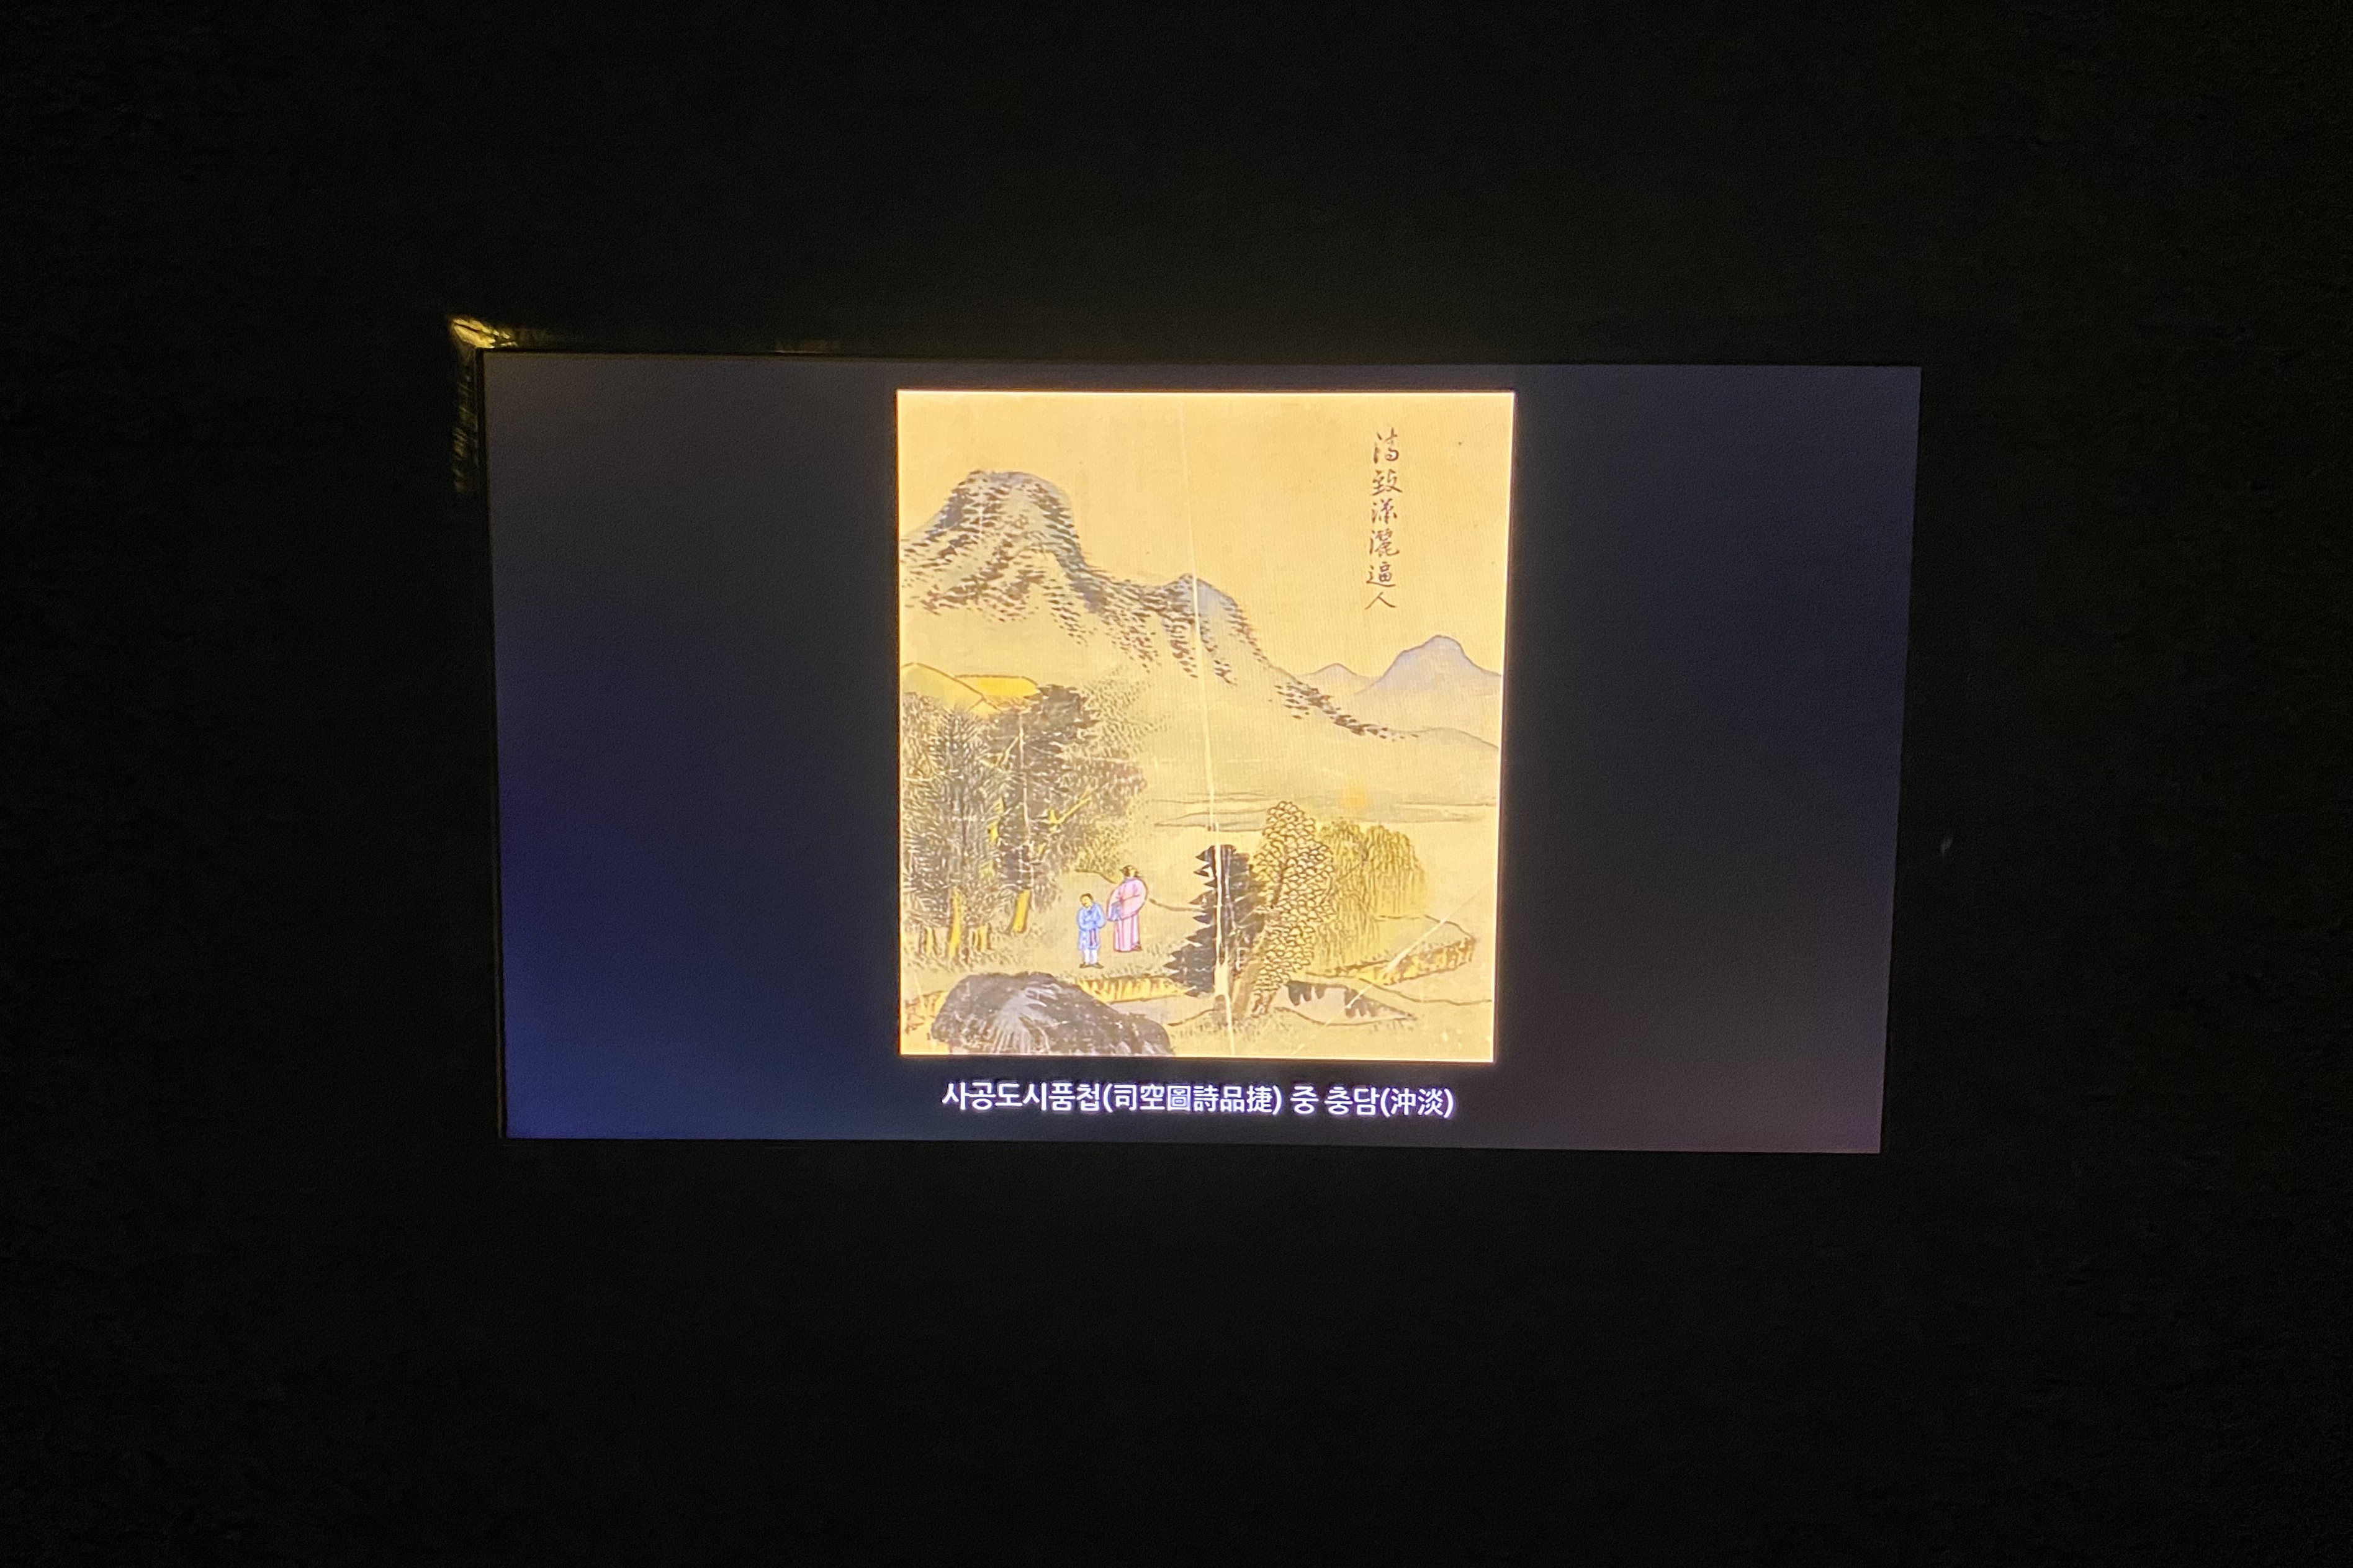 Savina Museum of Contemporary Art4 : A traditional landscape painting with mountains and boatmen displayed on a digital screen
